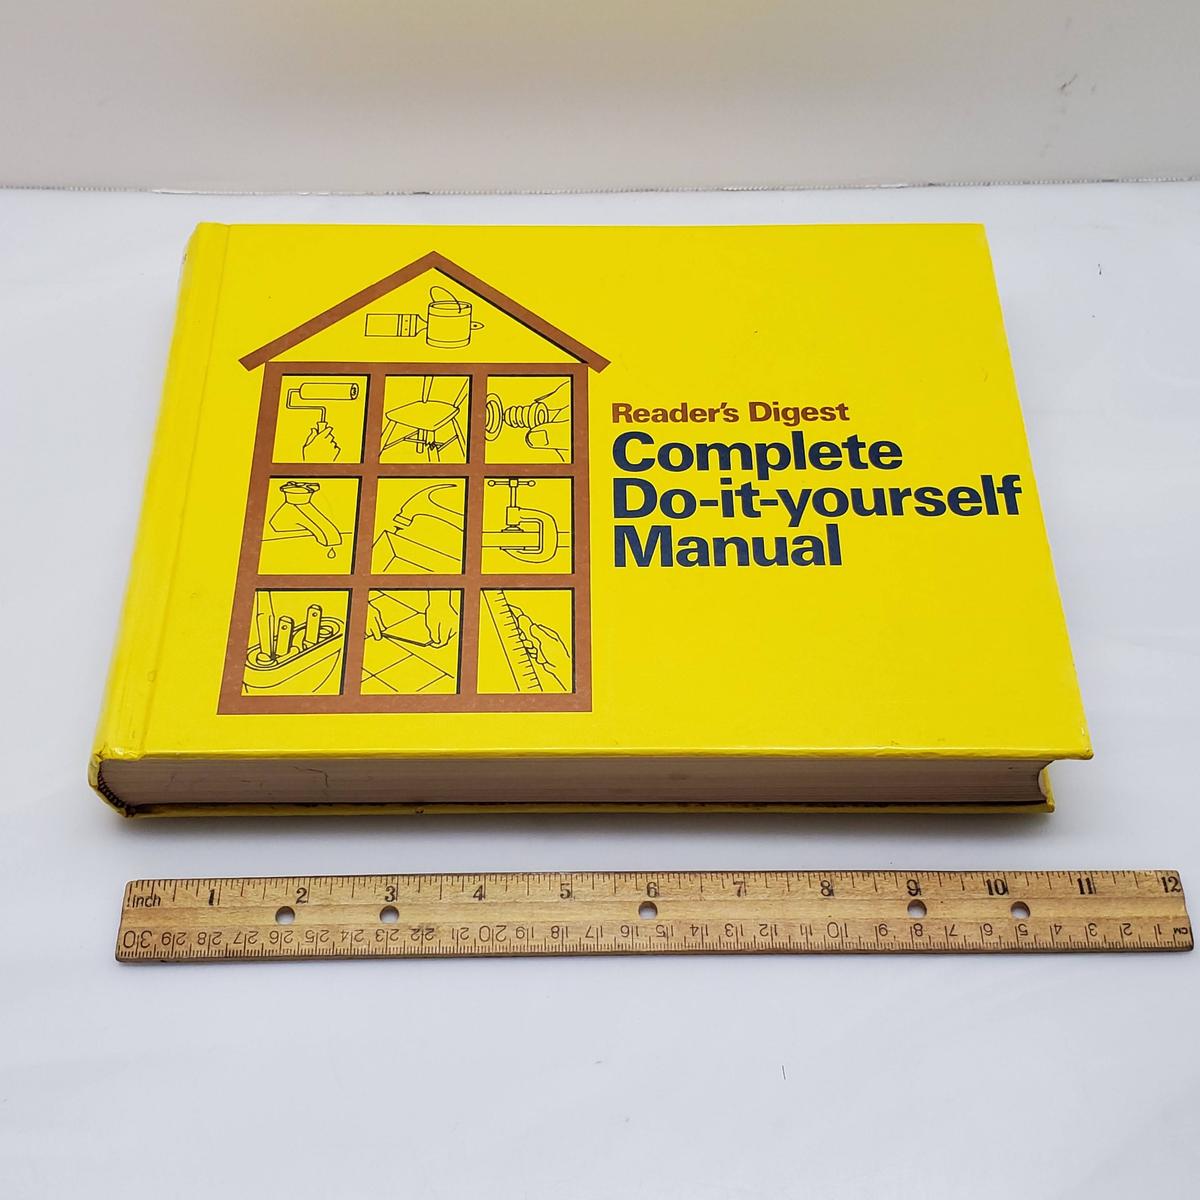 Reader’s Digest Complete Do-It-Yourself Manual, Copyright 1977